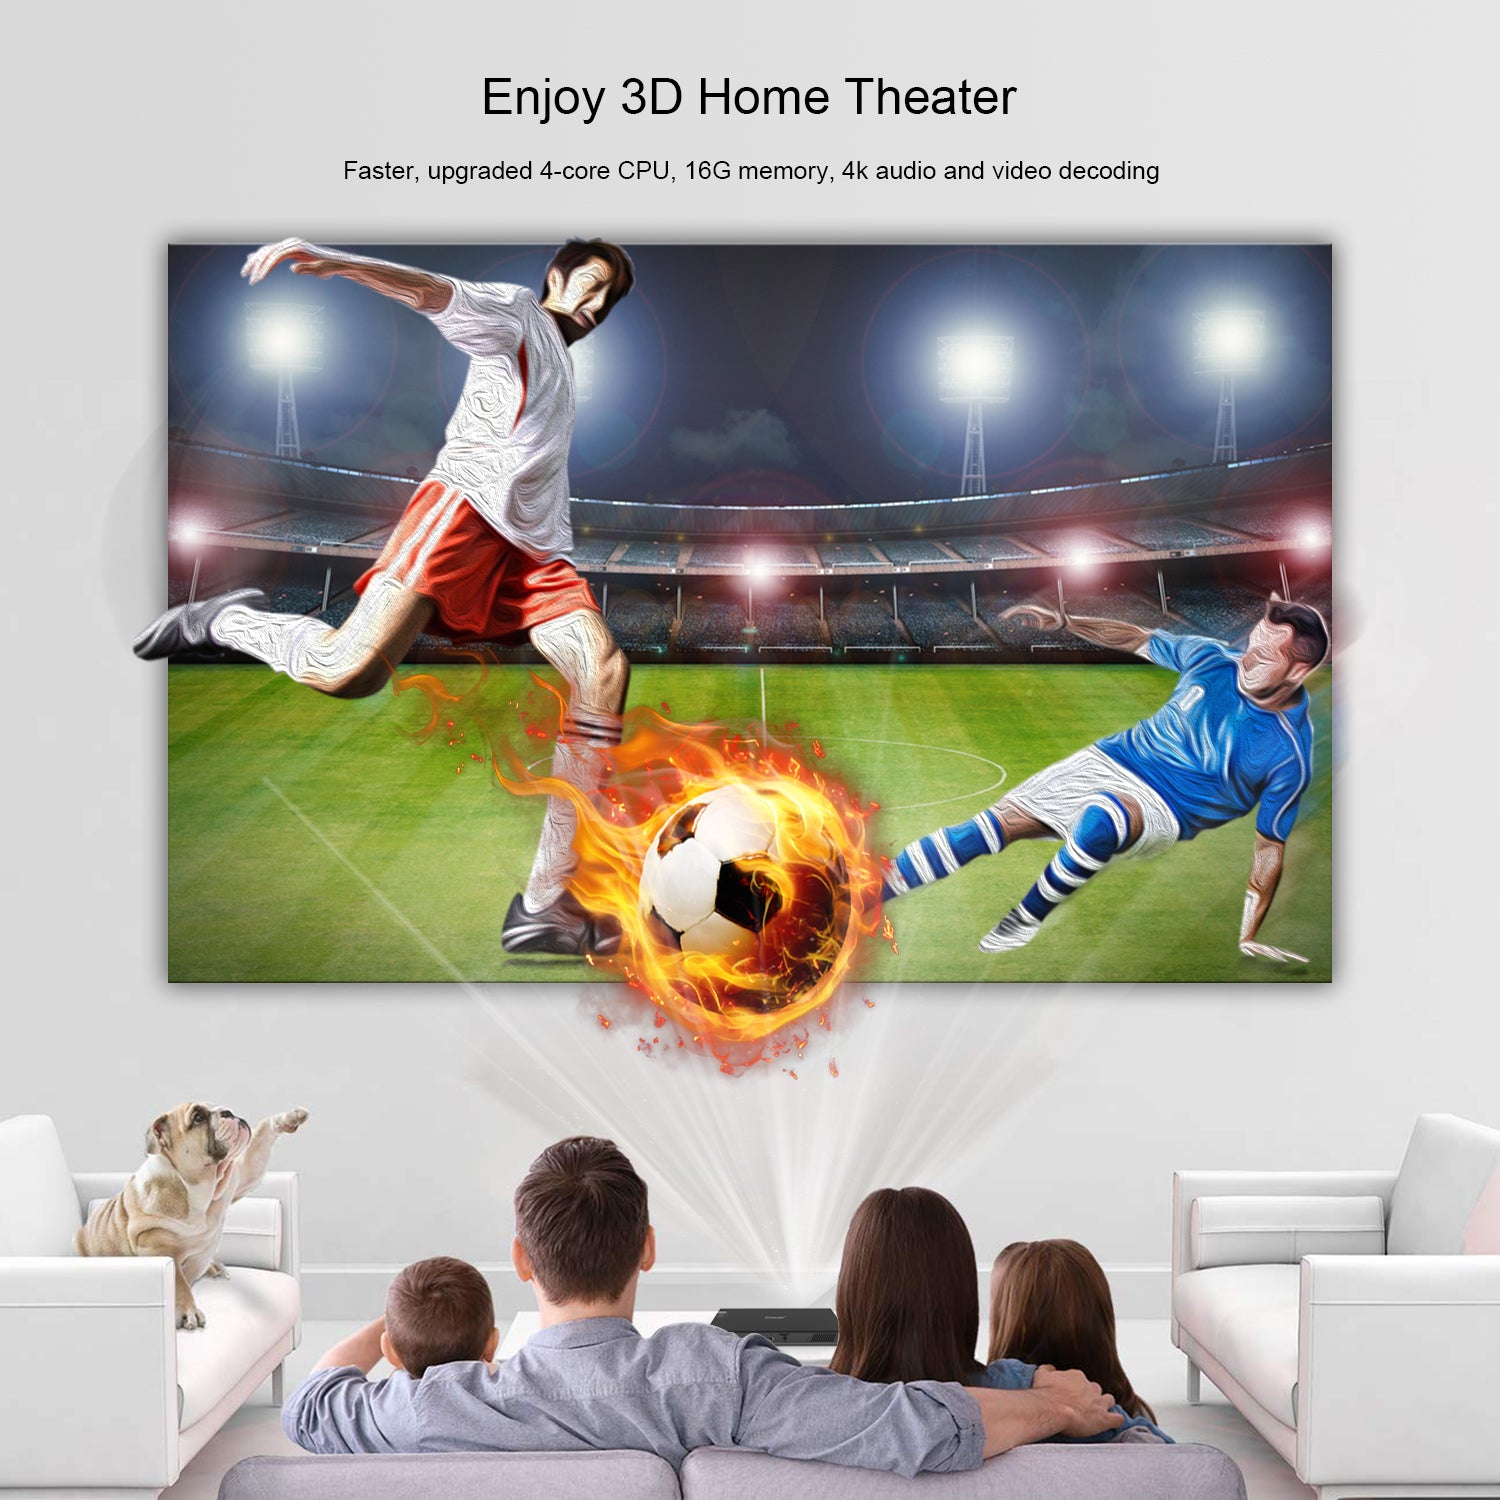 Toumei T5 Short Throw Projector Features 03